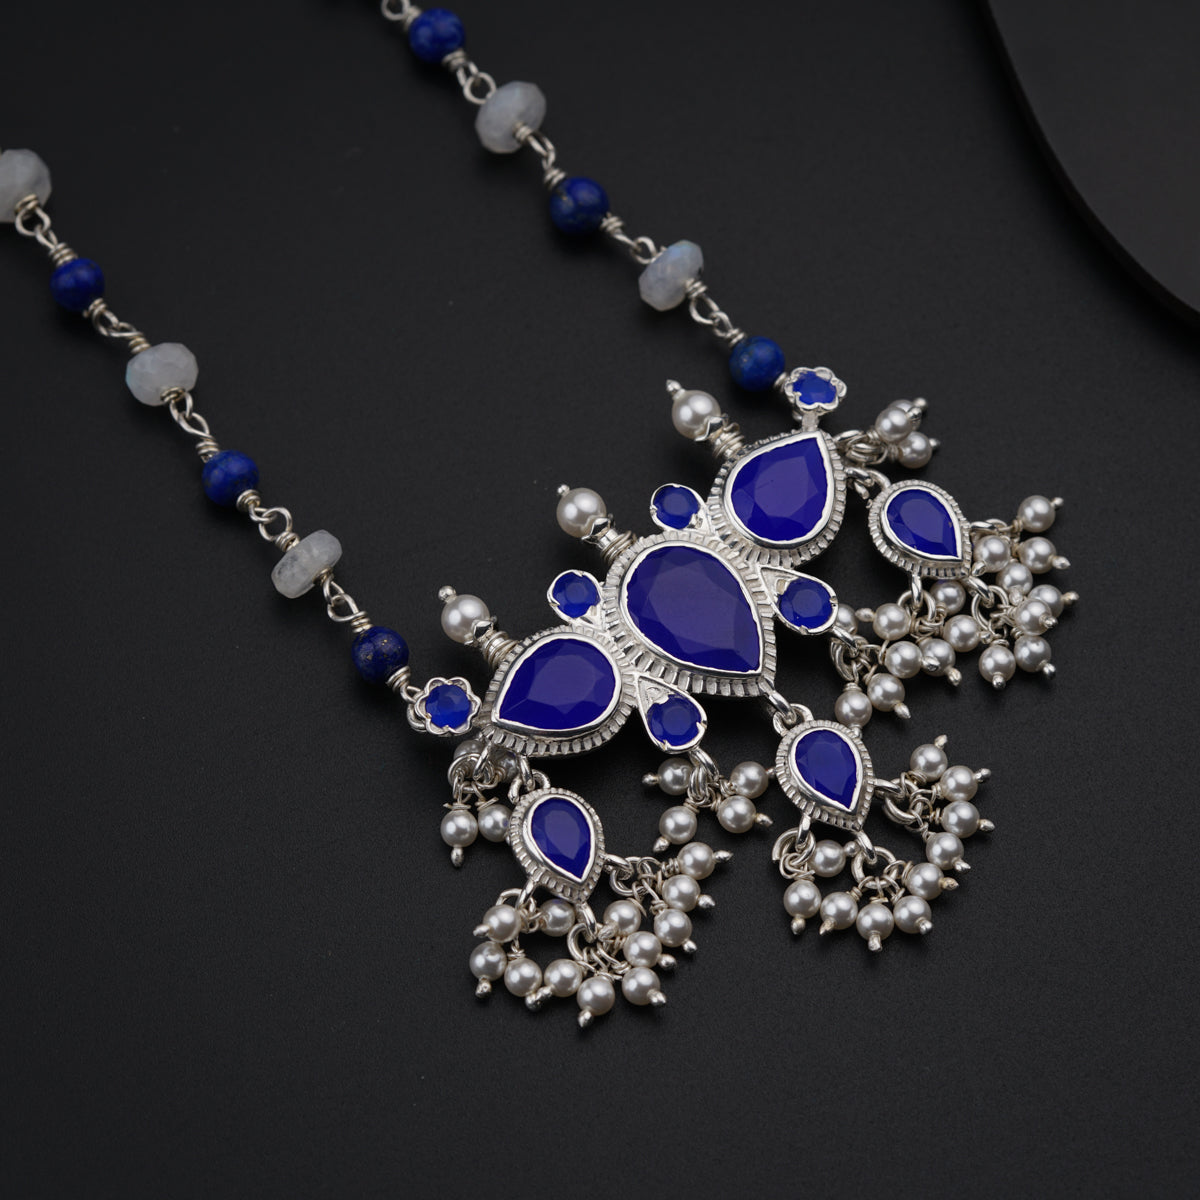 a blue and white necklace on a black surface